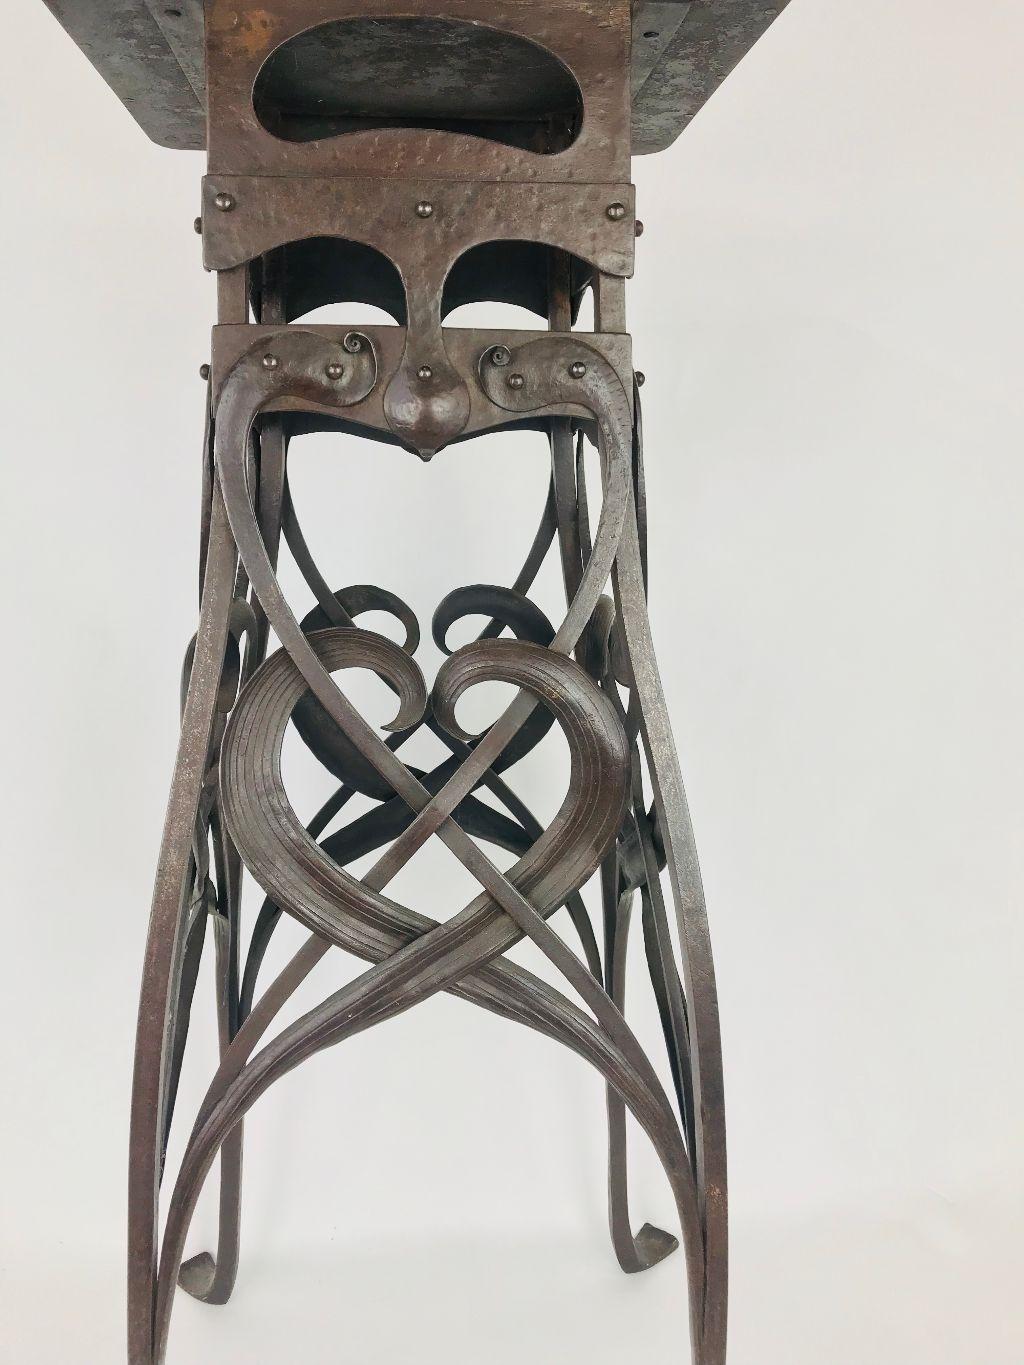 American Art Nouveau Handwrought Iron and Steel Table Hermann Obrist